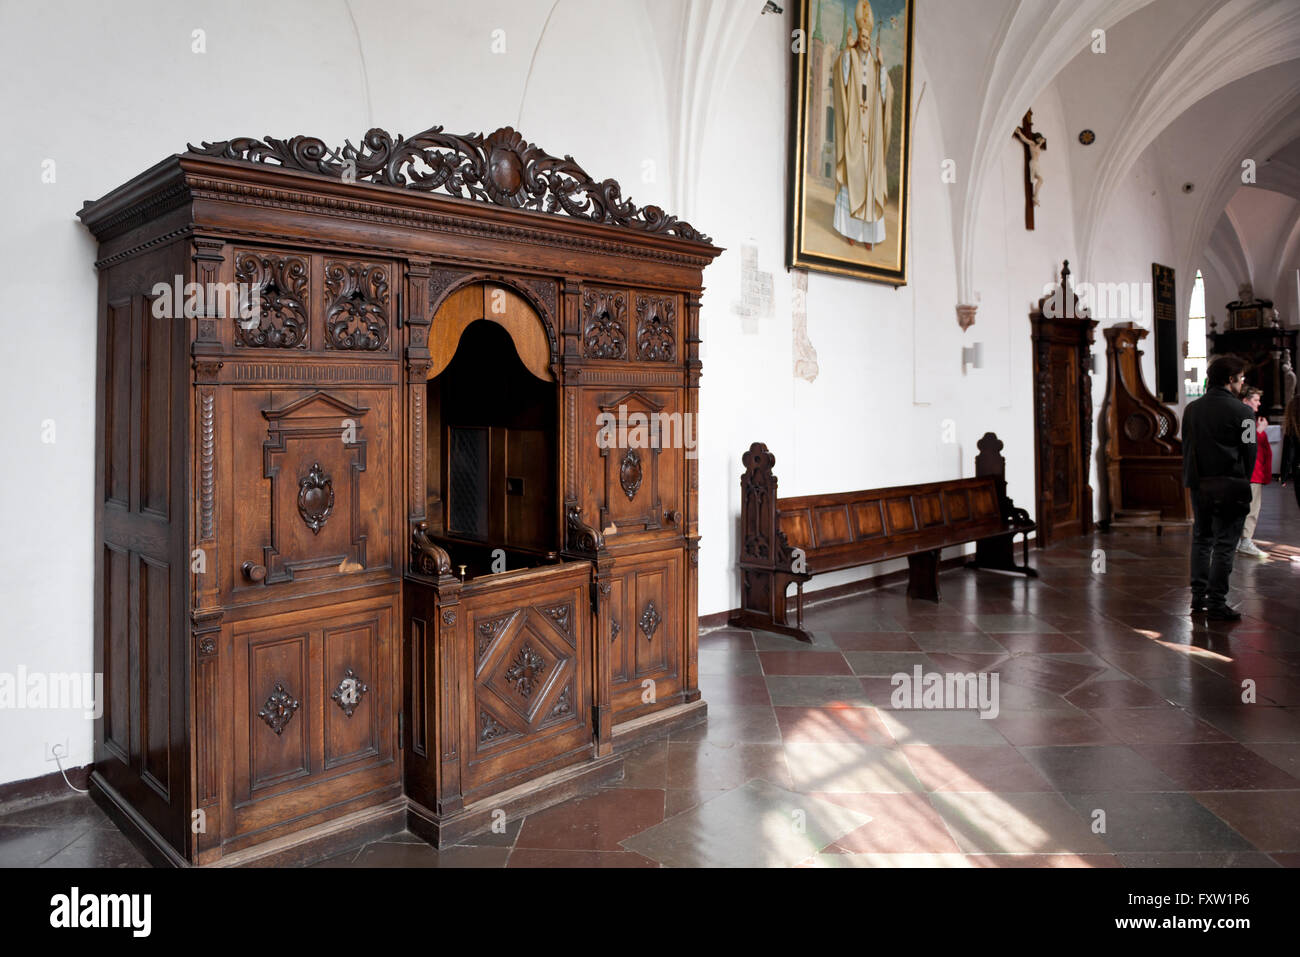 Antique confessional in Gdansk Oliwa Archcathedral Basilica of The Holy Trinity, Blessed Virgin Mary and St Bernard, Poland Stock Photo